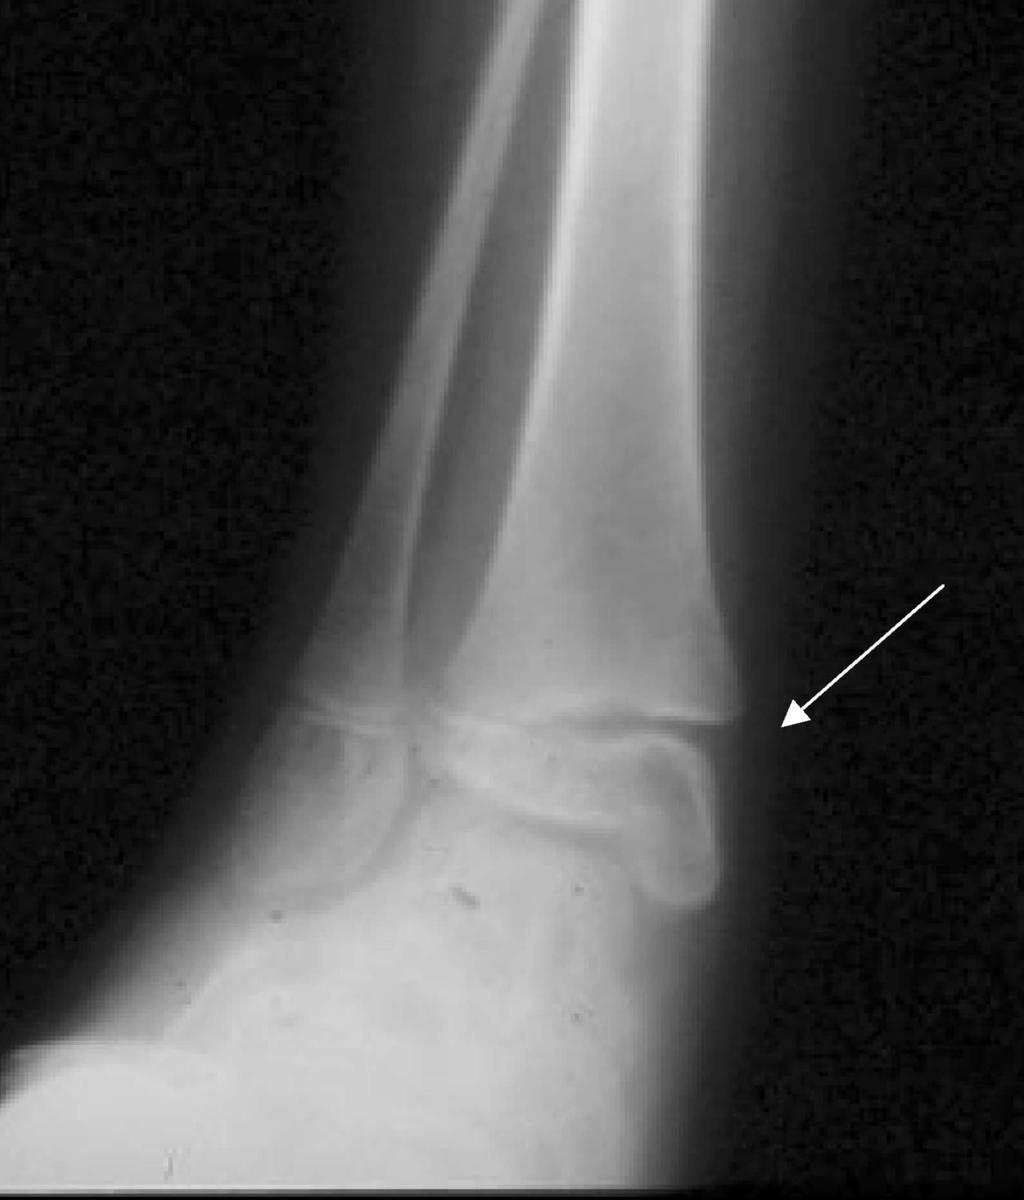 January March 2007 Vol. 29, No. 1 Salter-Harris Fractures 13 observation from the orthopedic physician is indicated. Type IV This fracture involves the epiphysis, physis, and metaphysis.